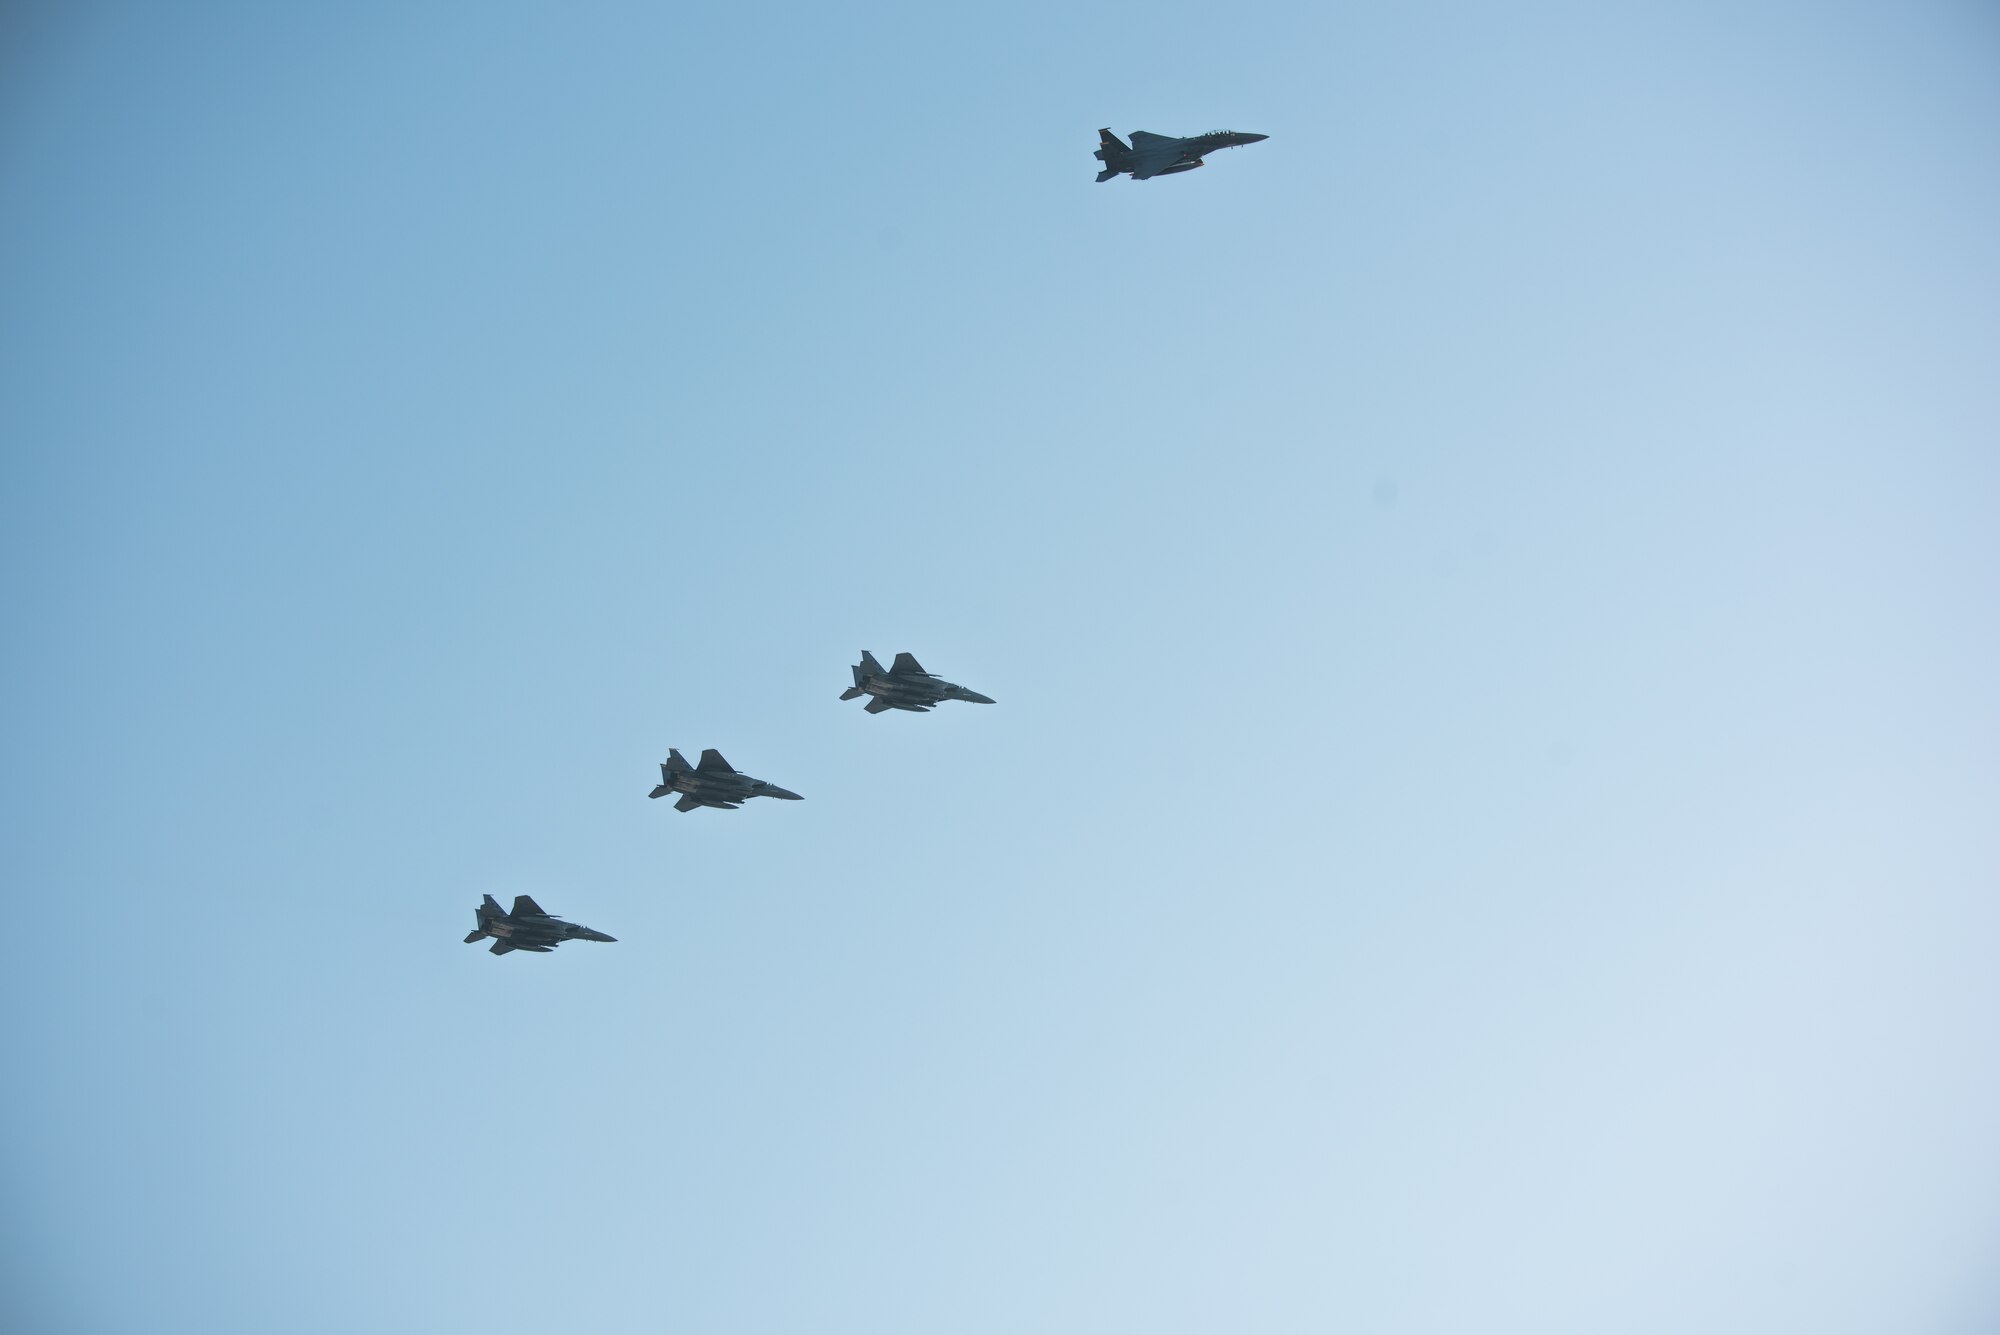 Four F-15E Strike Eagles from the 336th Fighter Squadron, 4th Fighter Wing at Seymour Johnson Air Force Base, North Carolina prepare to land at Al Dhafra Air Base, United Arab Emirates, June 13, 2019. The F-15E’s joined ADABs inventory of other fighters to include F-15C Eagles and F-35A Lightning IIs. (U.S. Air Force photo by Staff Sgt. Chris Thornbury)